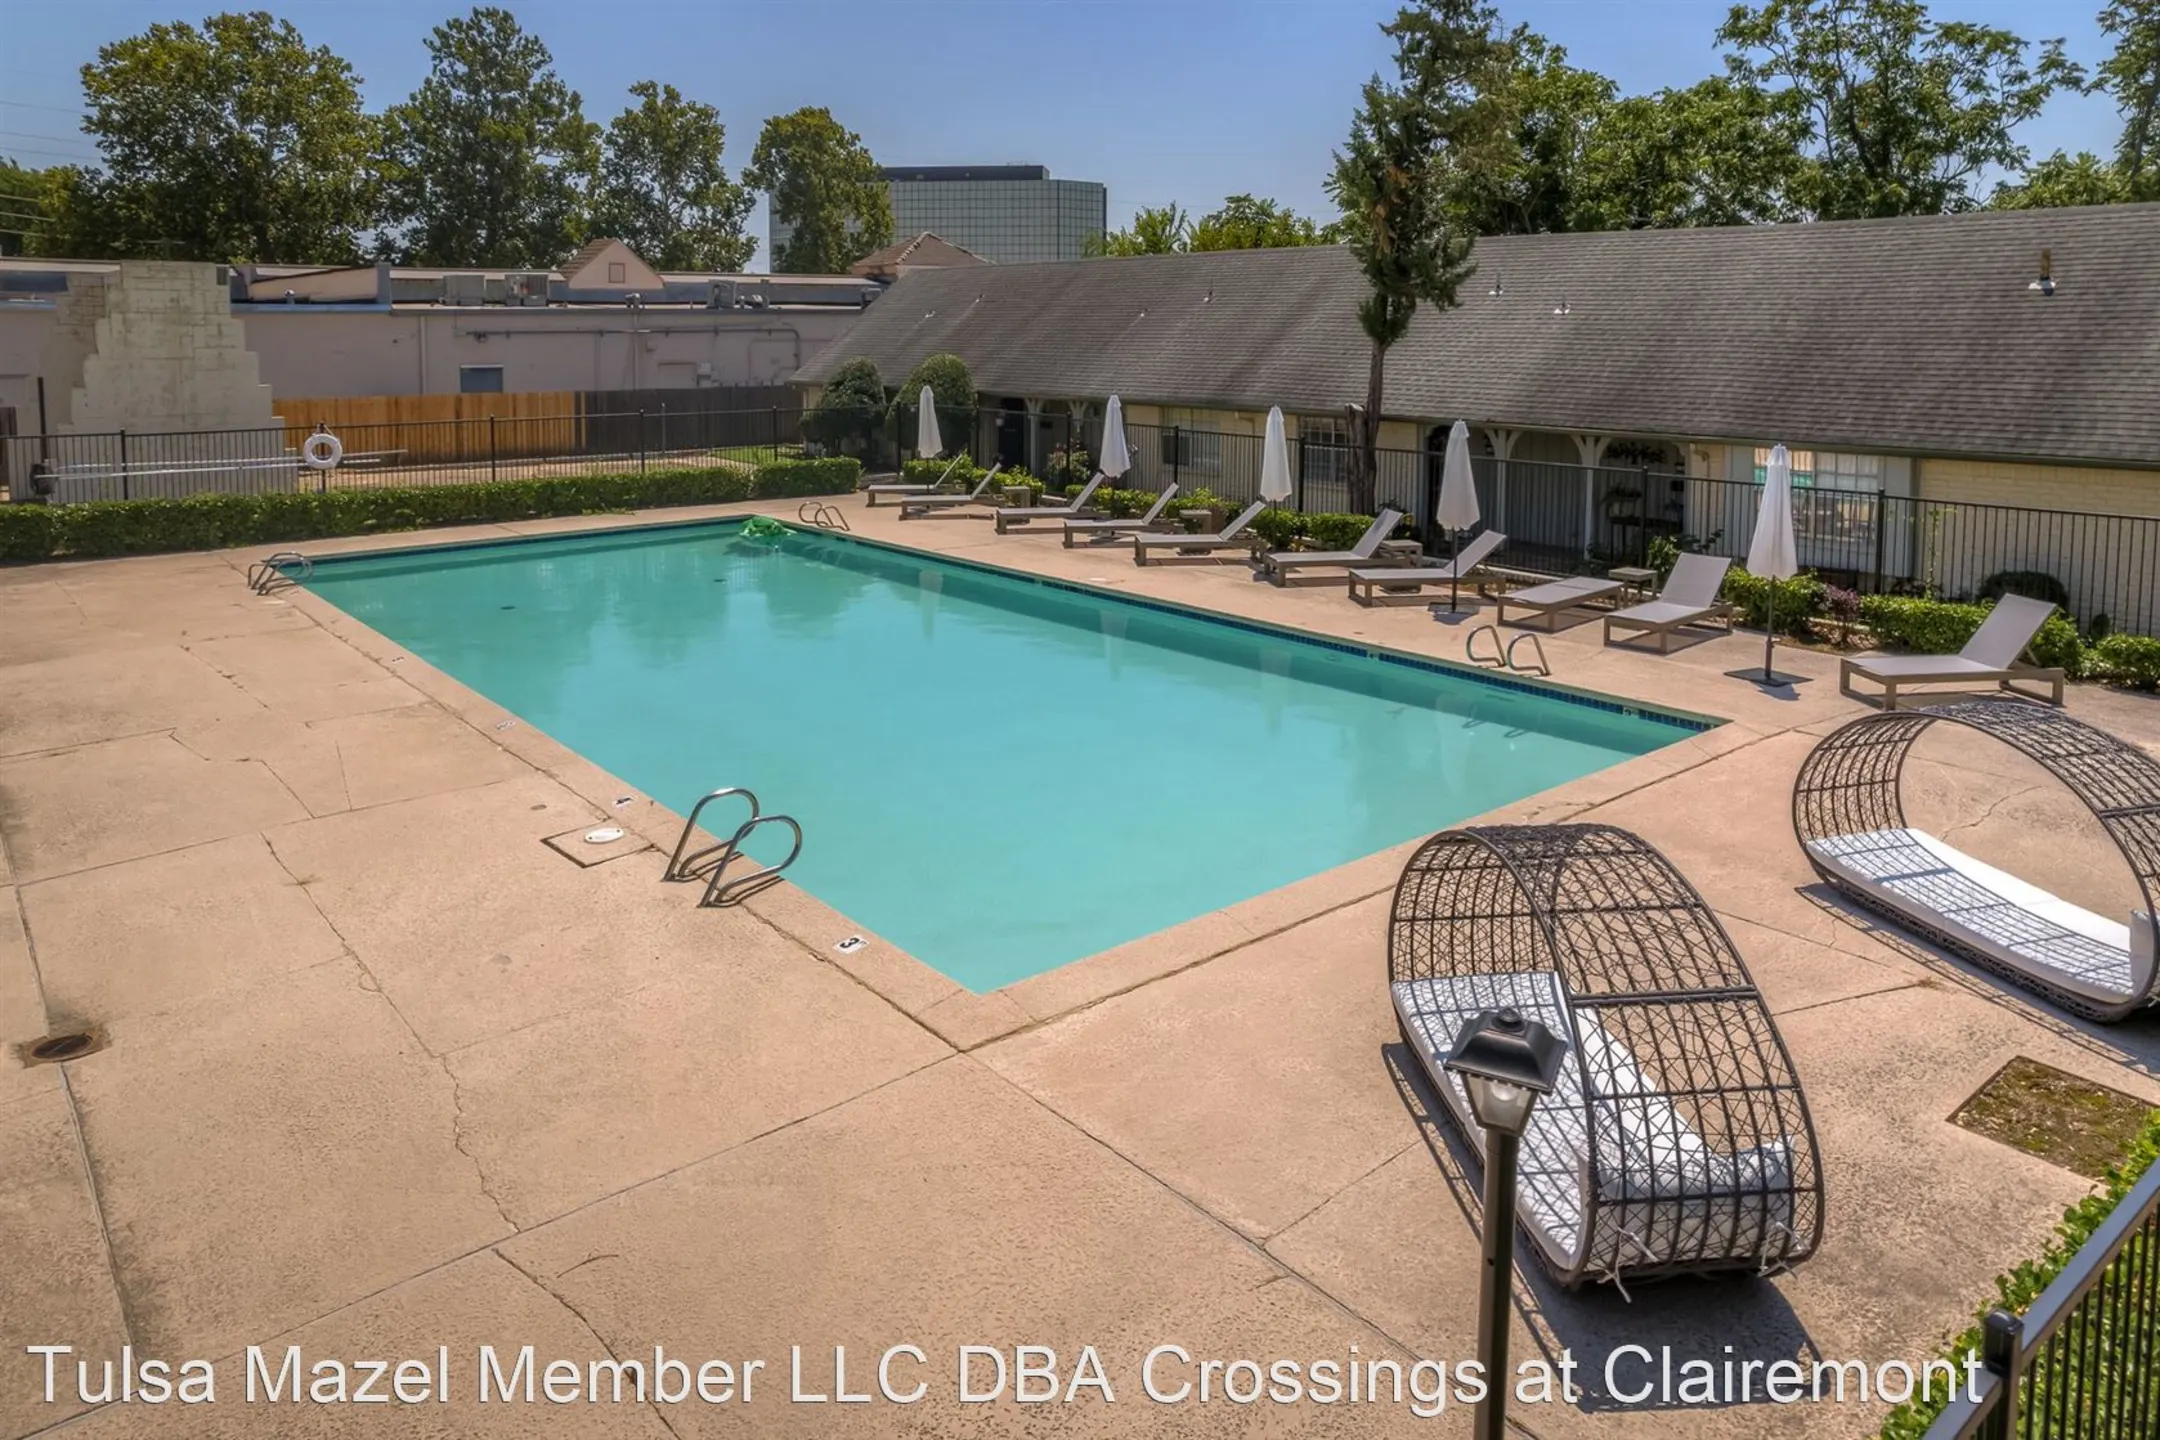 Pool - Crossings at Clairemont - Tulsa, OK